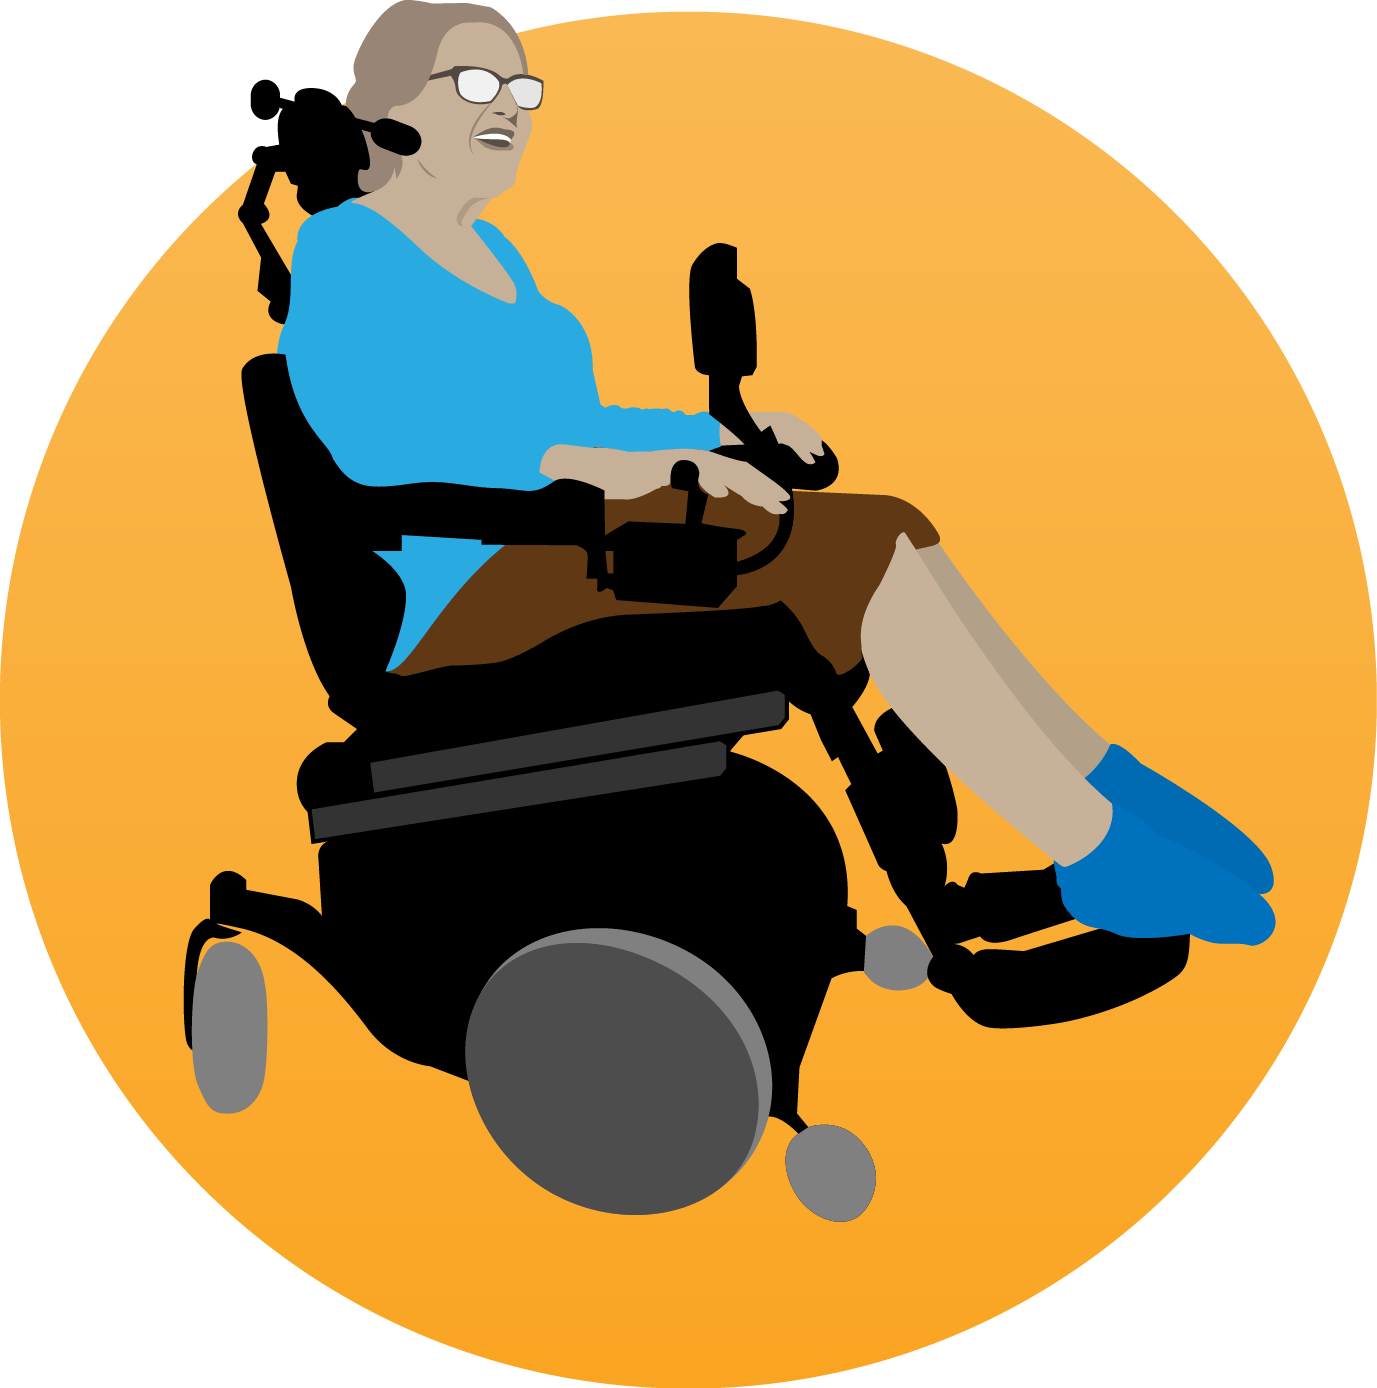 You are eligible for Medicare if you have ALS